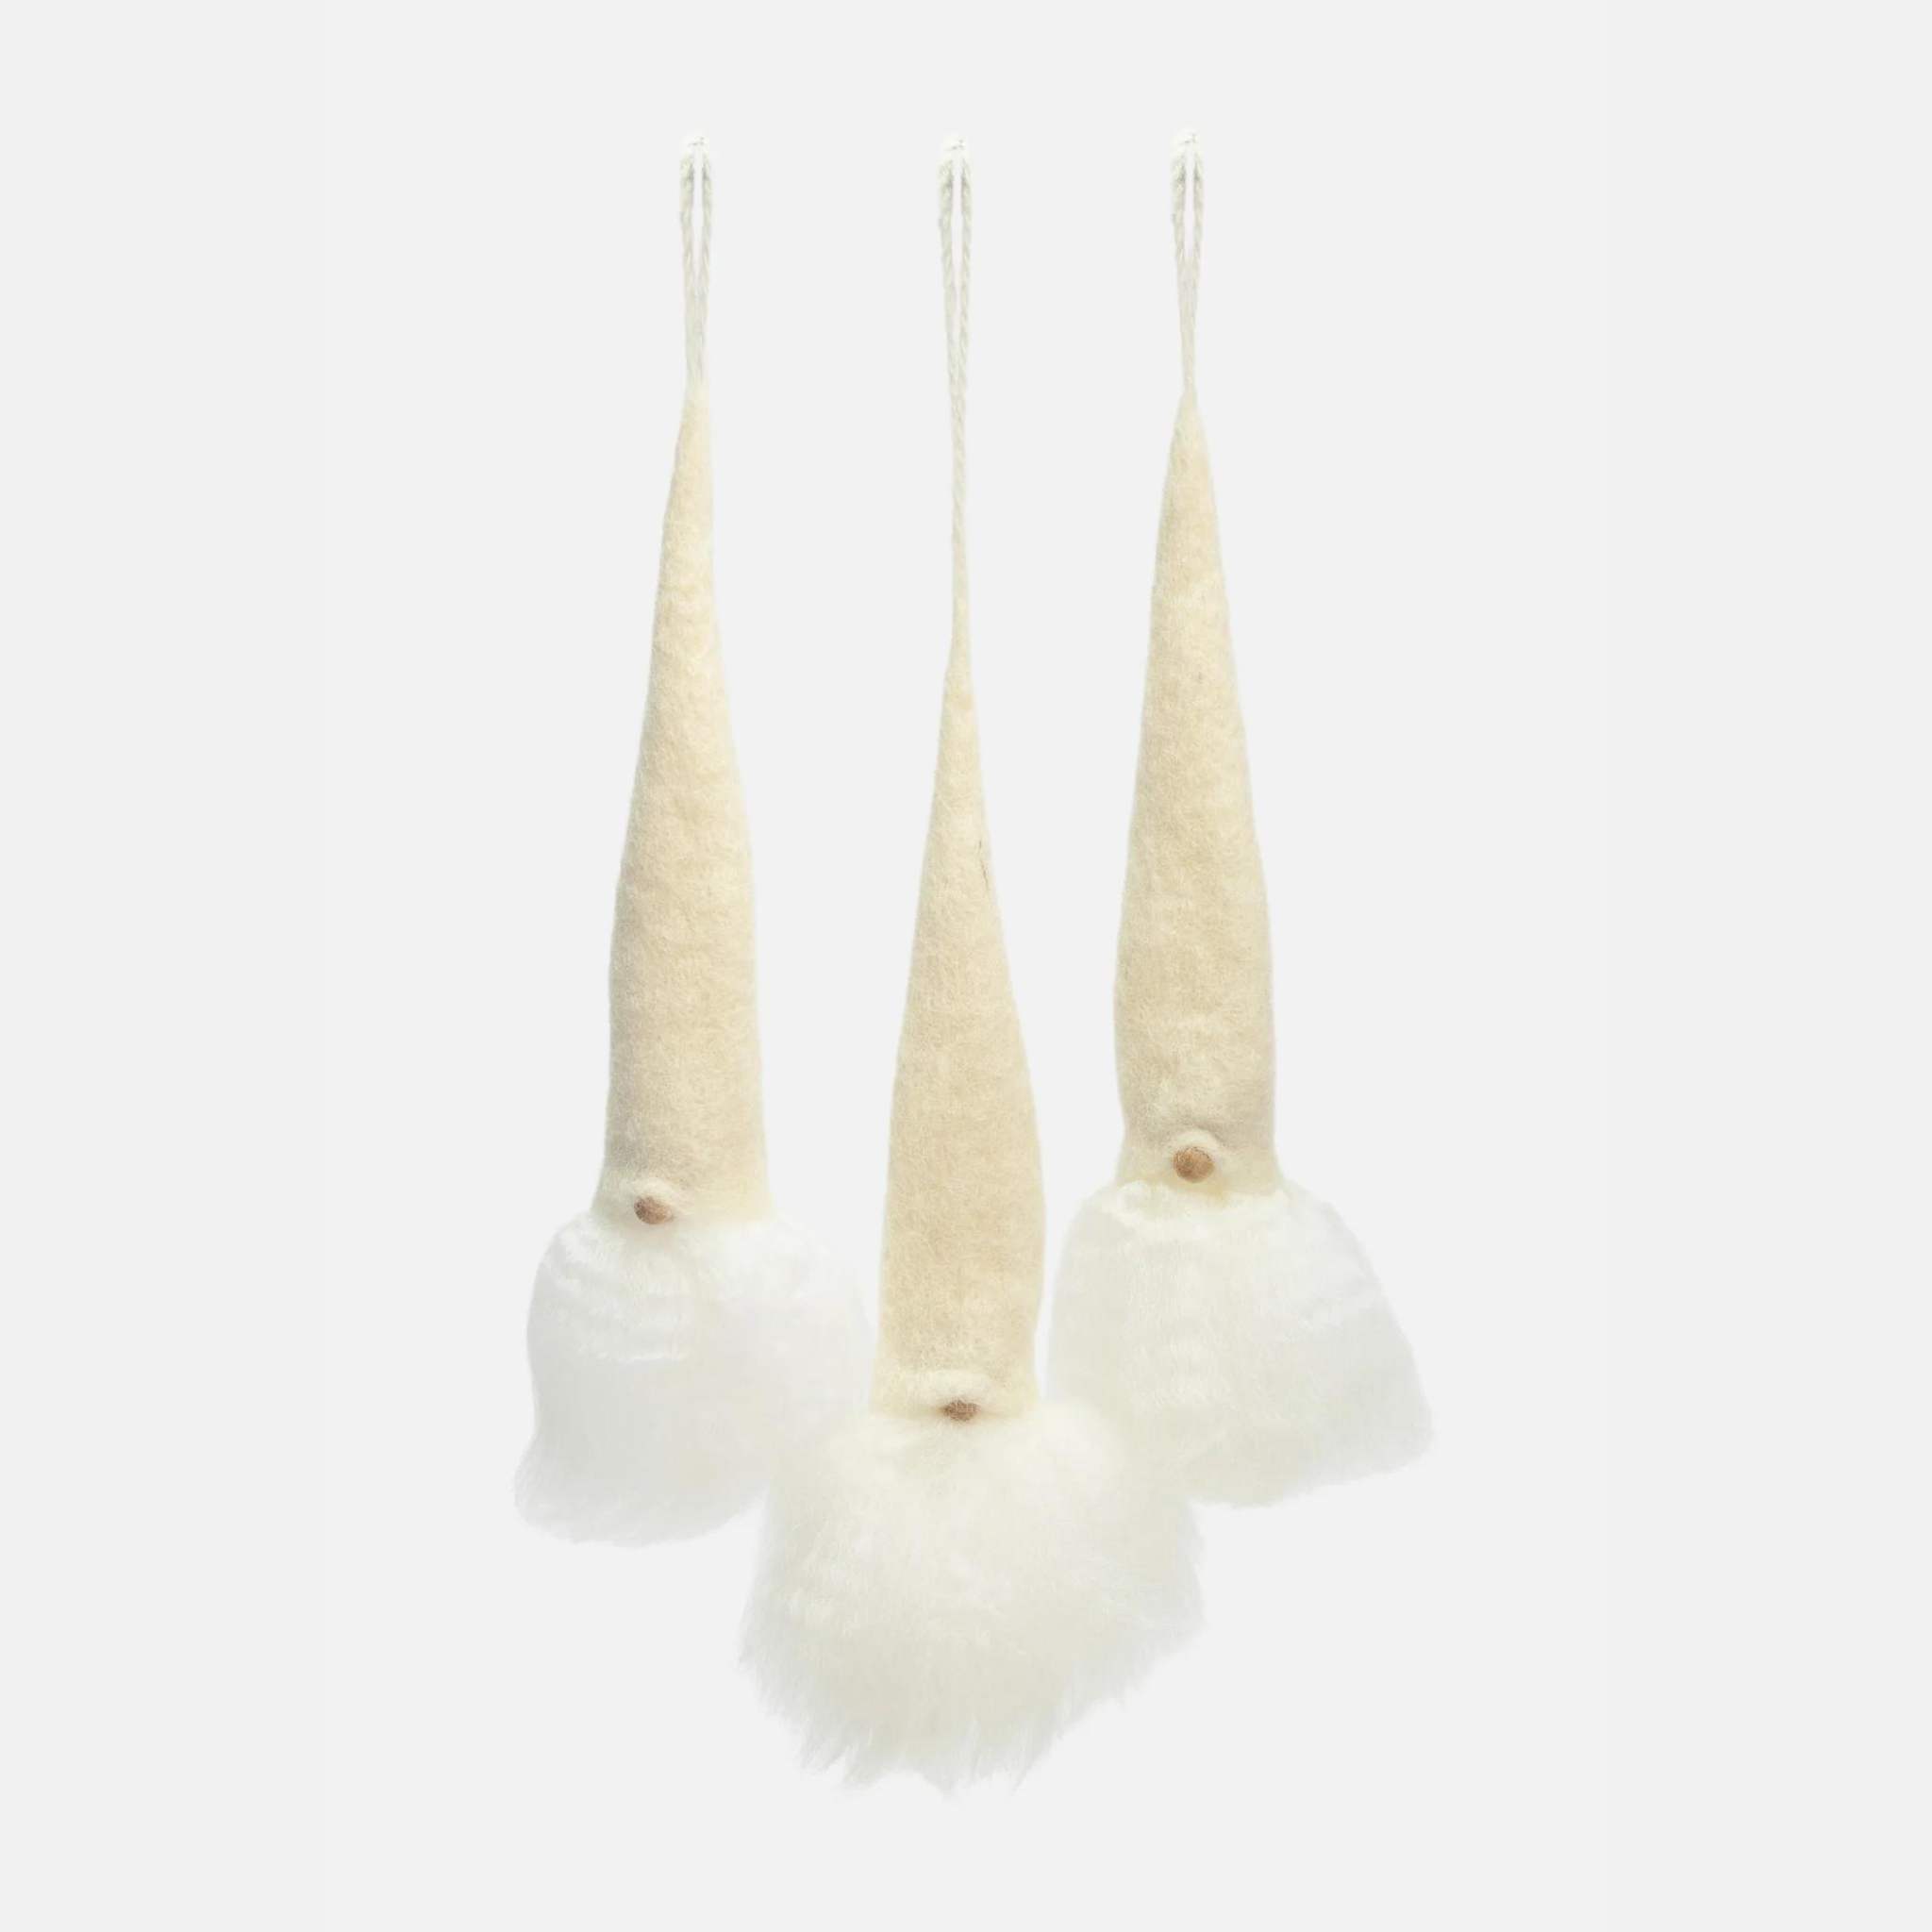 3-Pack Tomte Ornaments from Sweden